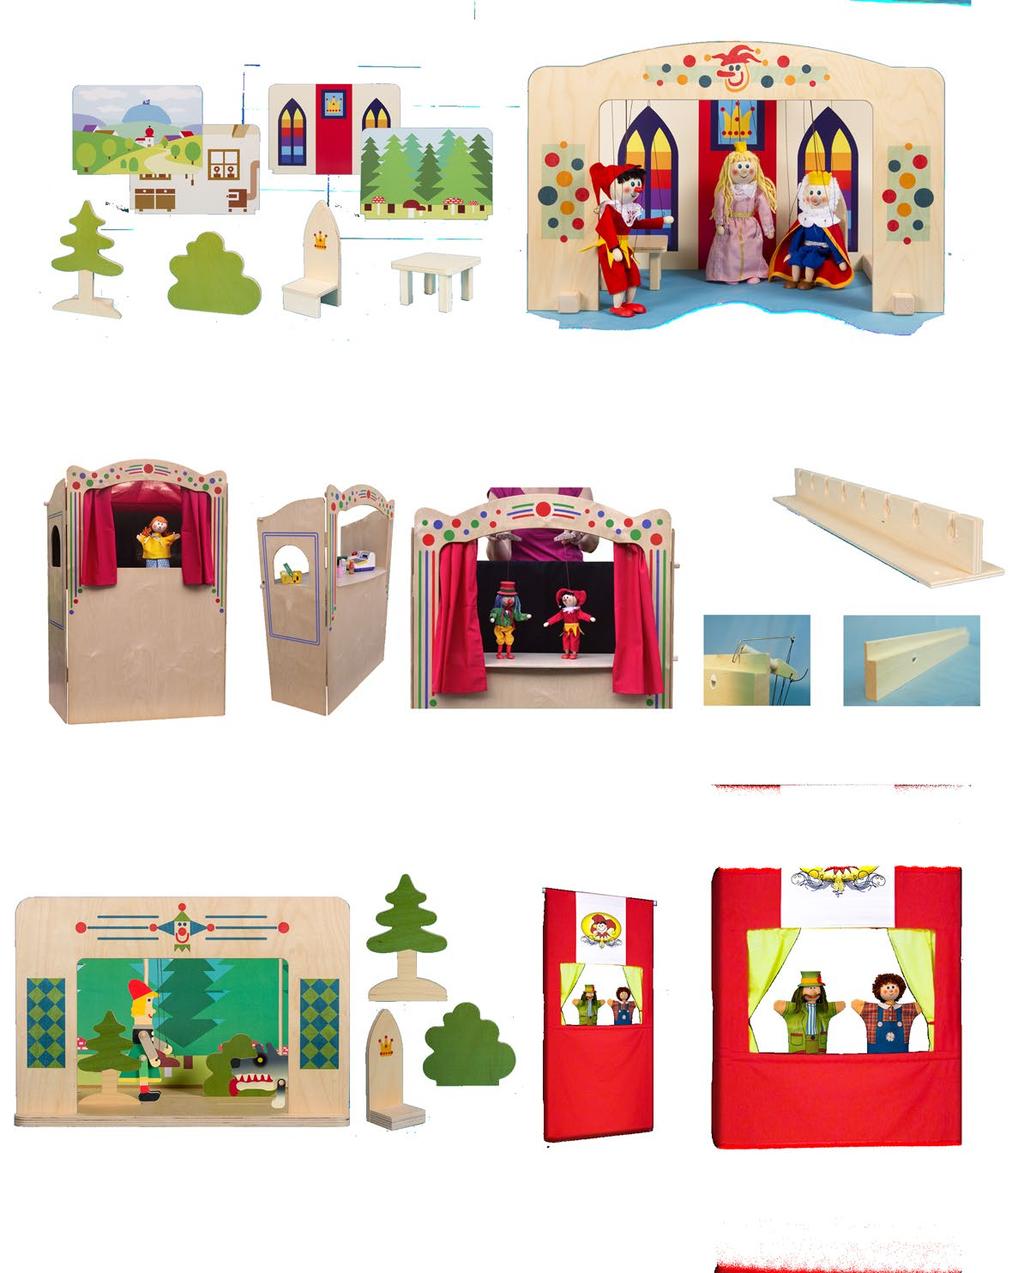 PUPPET THEATRES Puppet theatre for 20 cm size puppets - 62 Size: width 59 cm, height 35 cm, depth 29 cm, height of the hole of the front portal 30 cm Material: wood, textile (curtain) Purpose: 20 cm